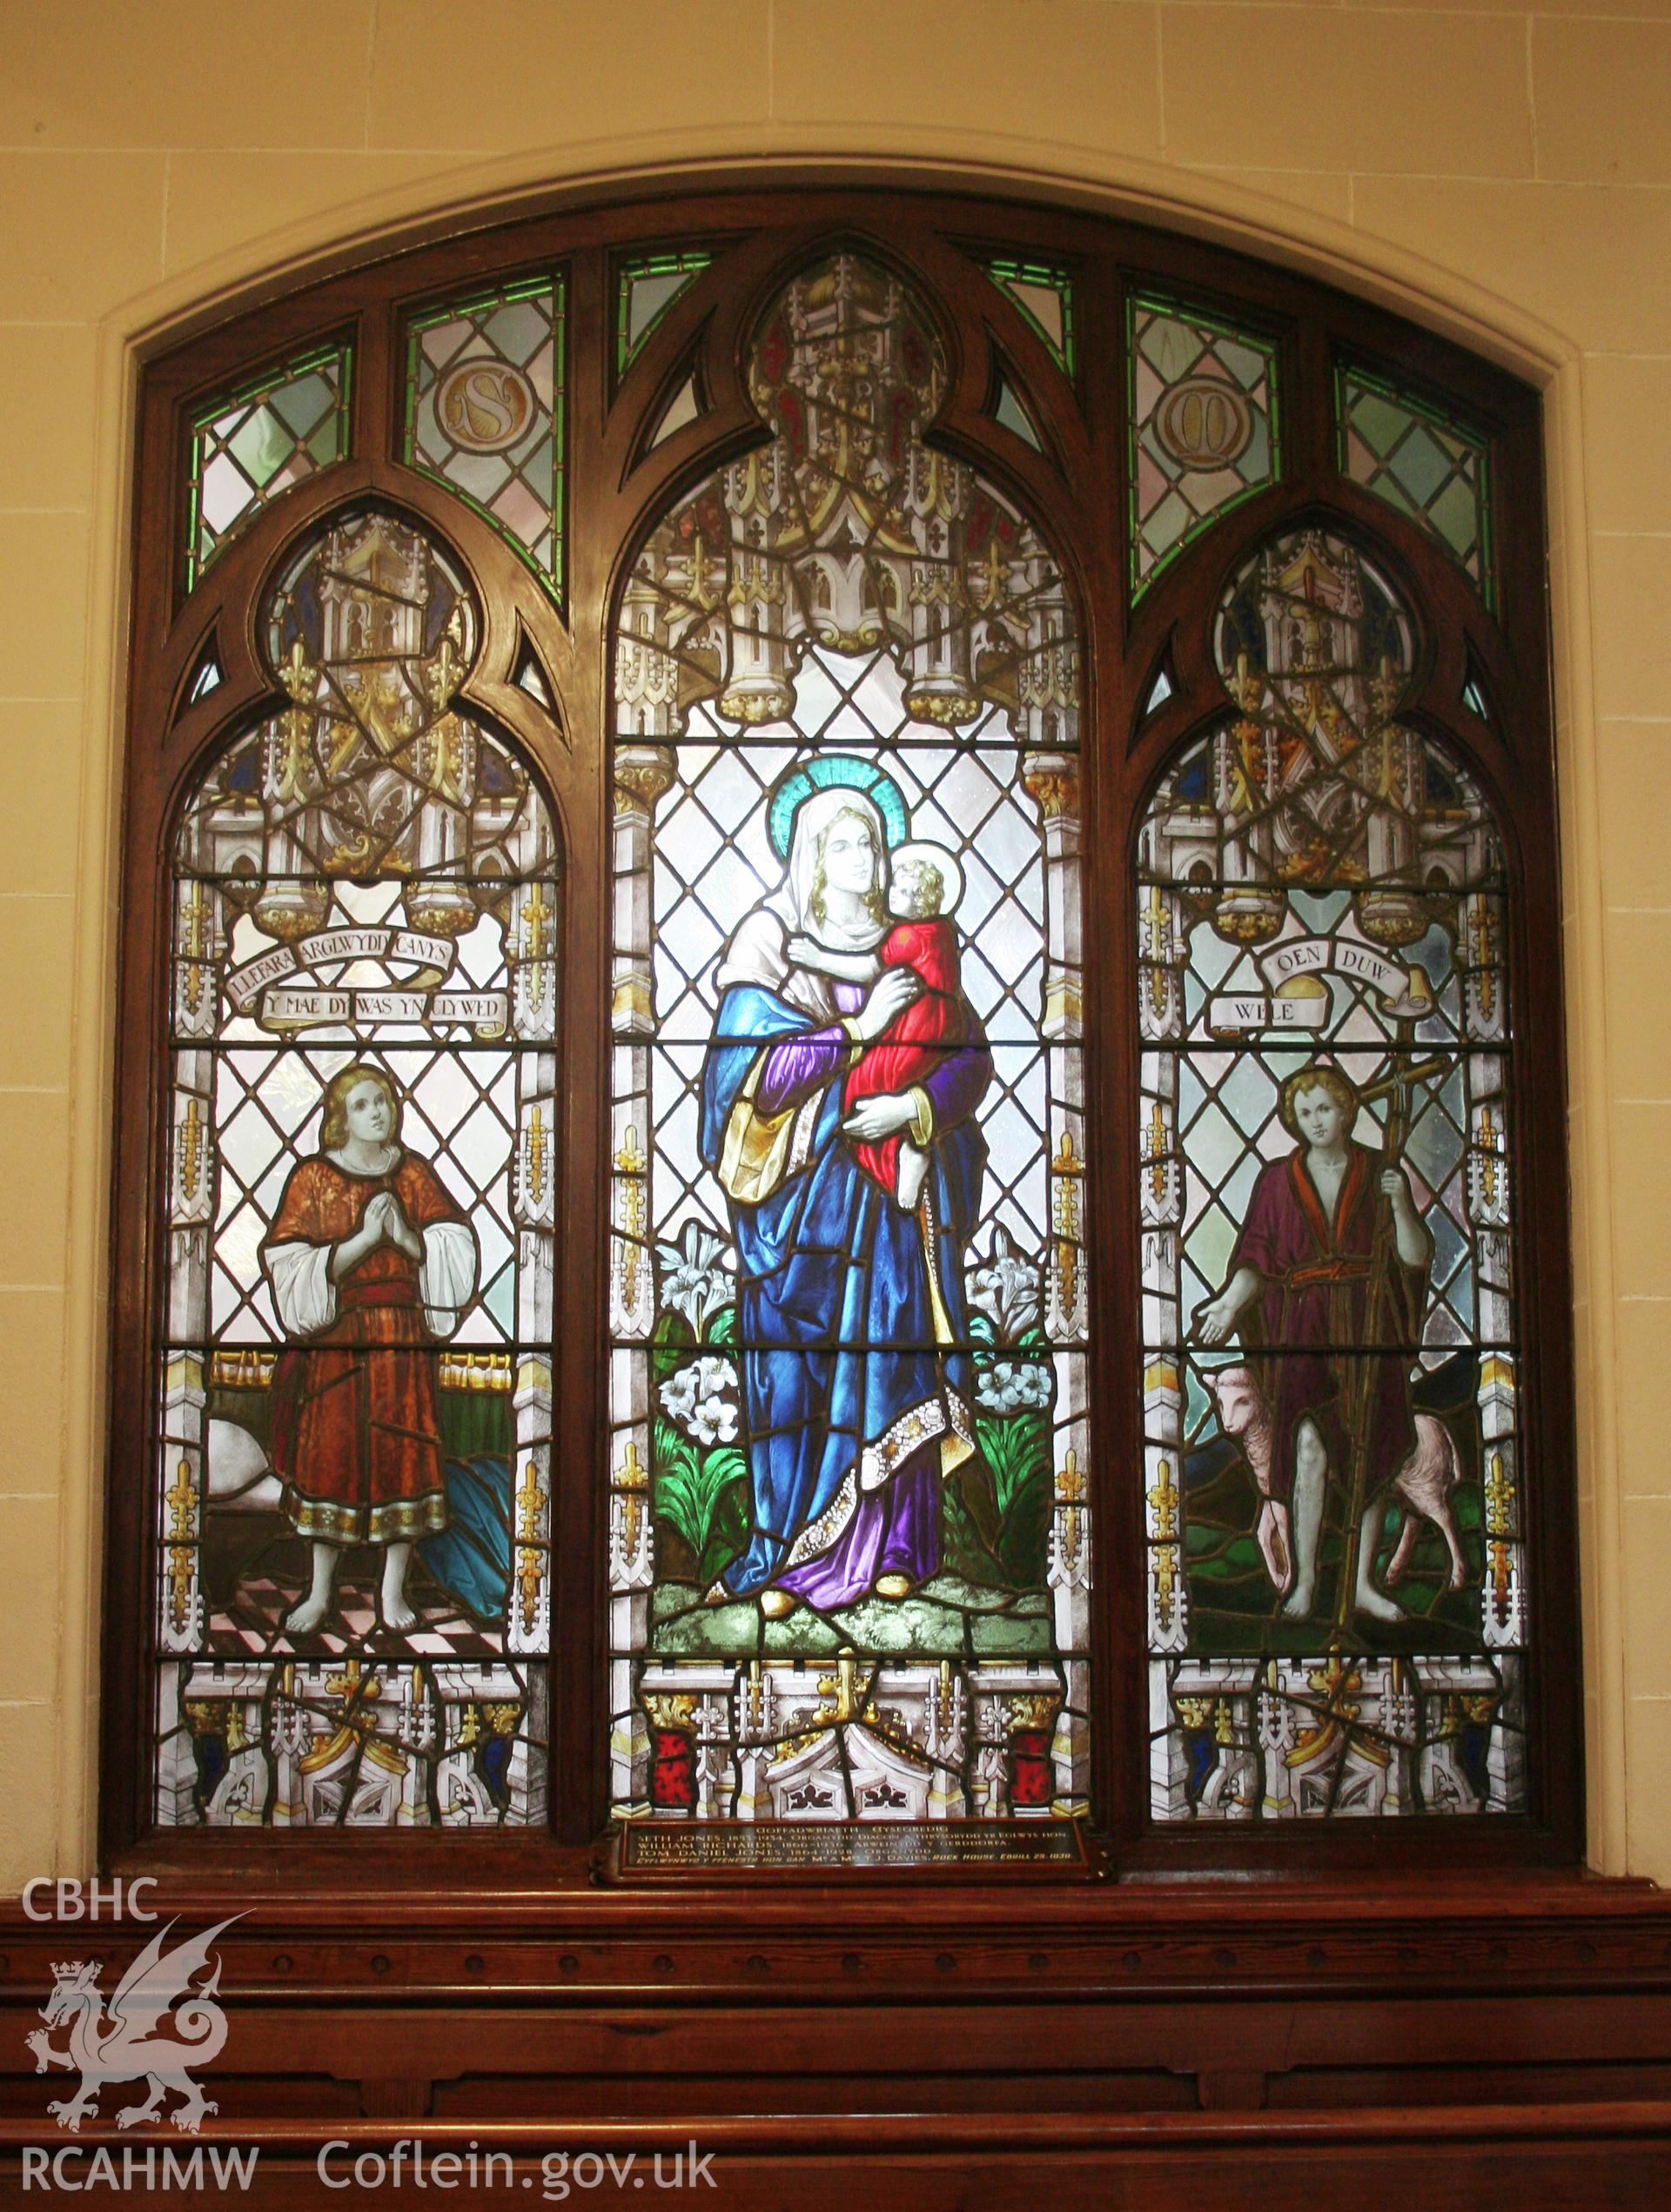 Capel Als, stained glass window at the north end of the main interior.